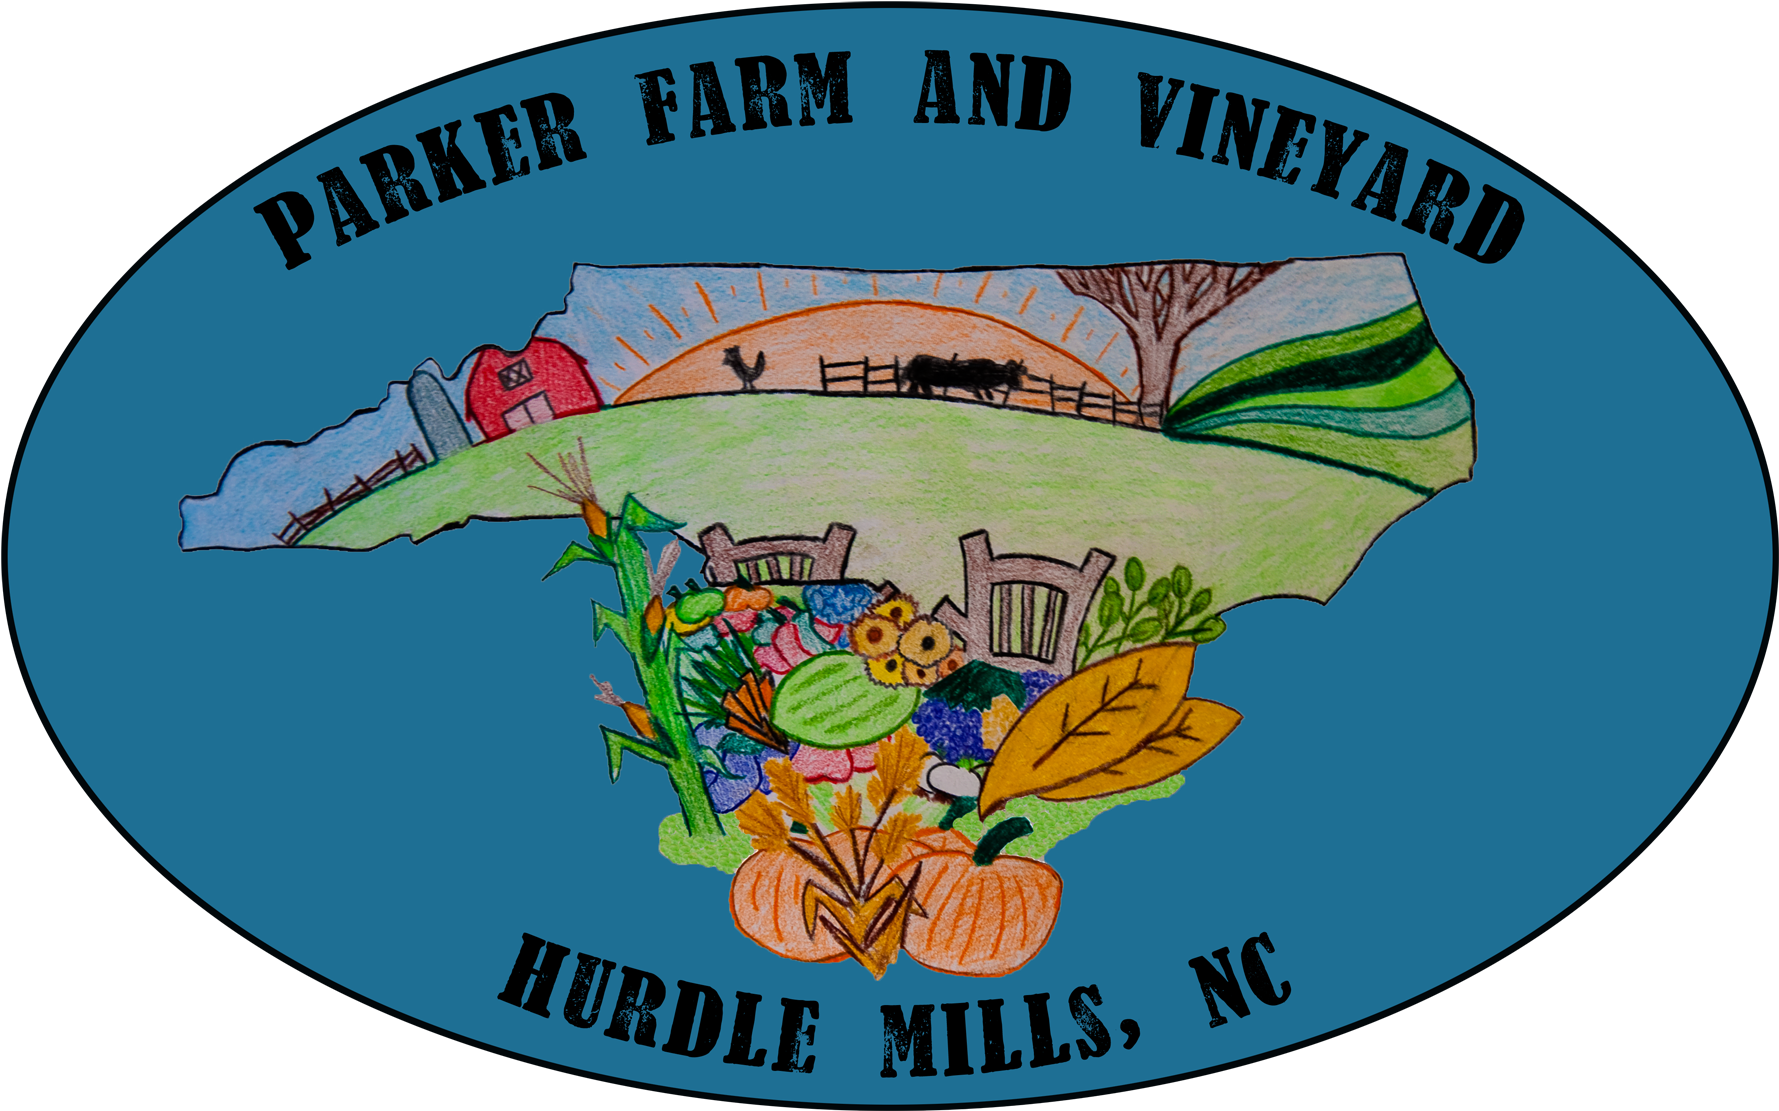 Parker Farm And Vineyard Cary Downtown Farmers Market - Hurdle Mills (1800x1200)